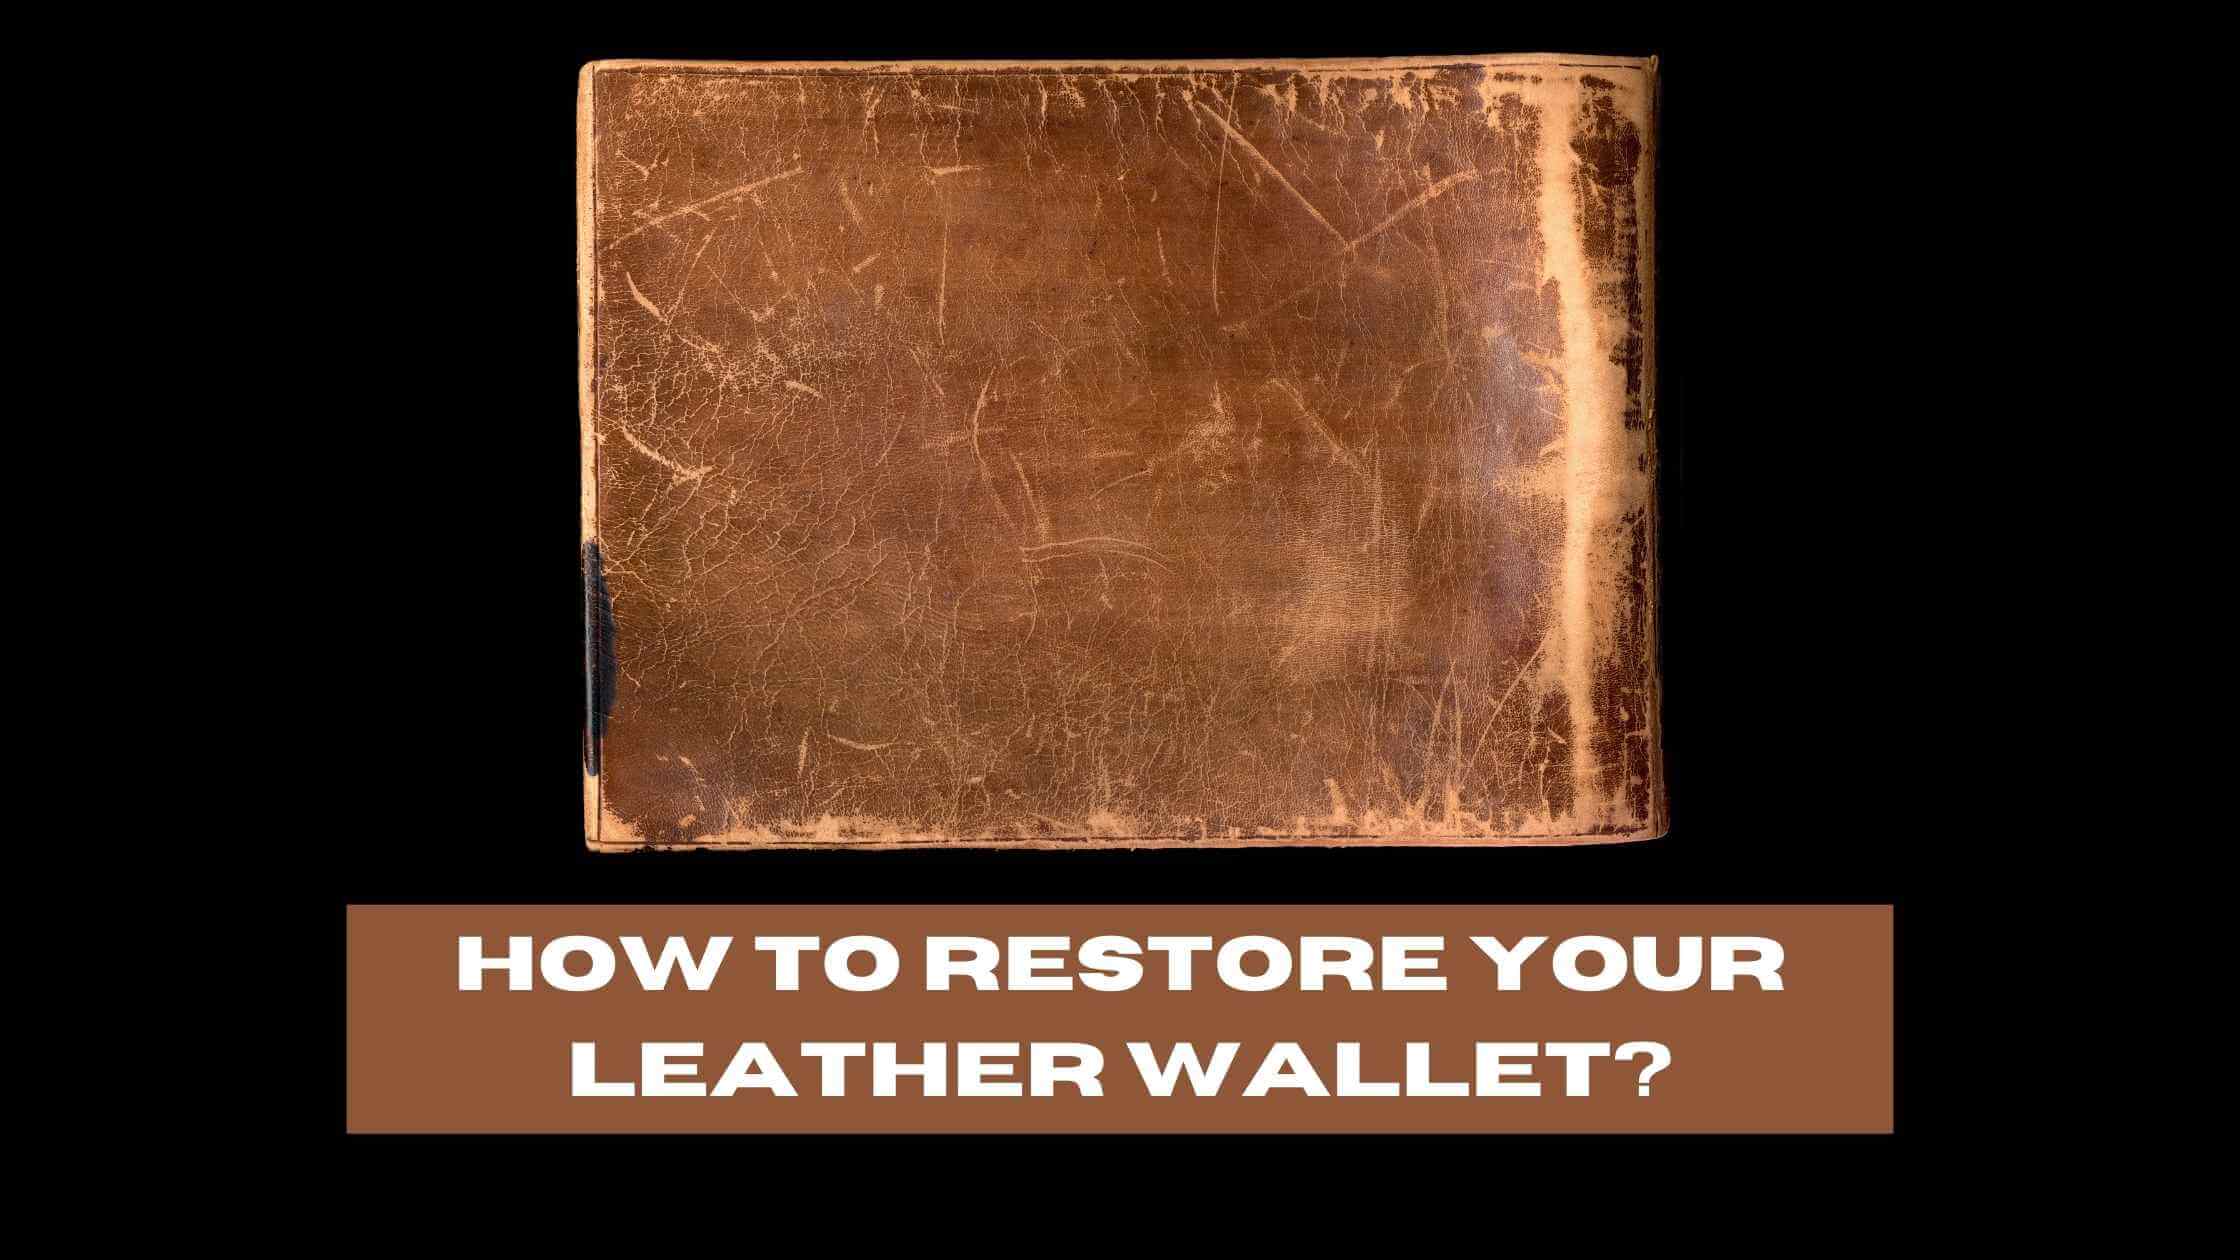 How to Restore Your Leather Wallet